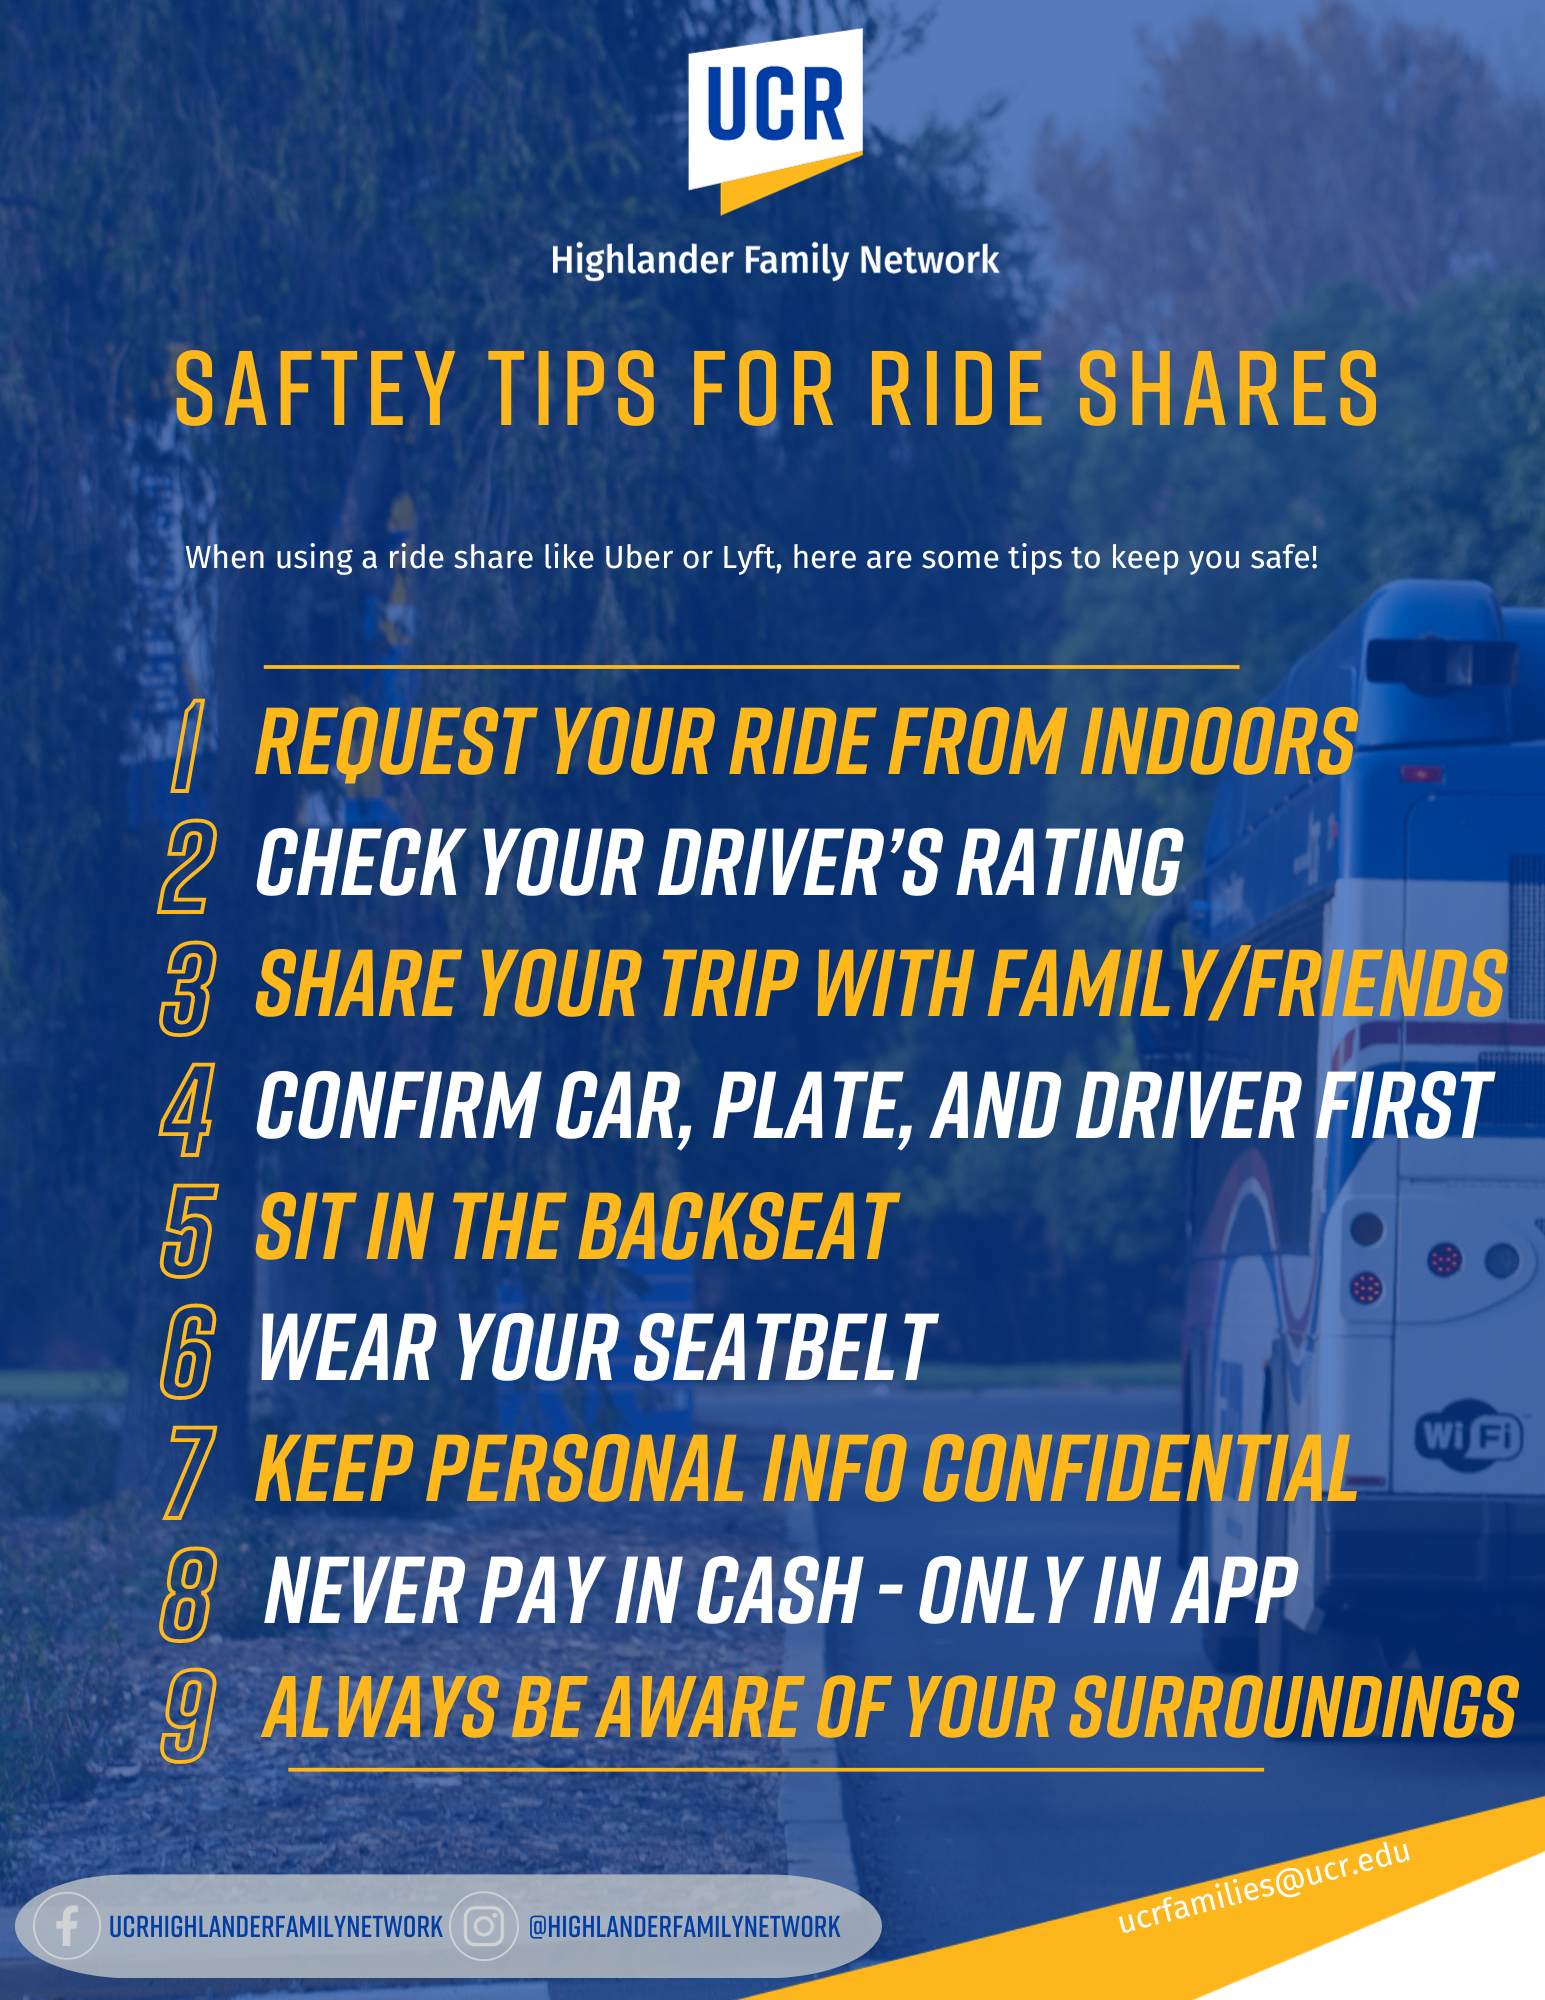 Safety Tips for Rideshares